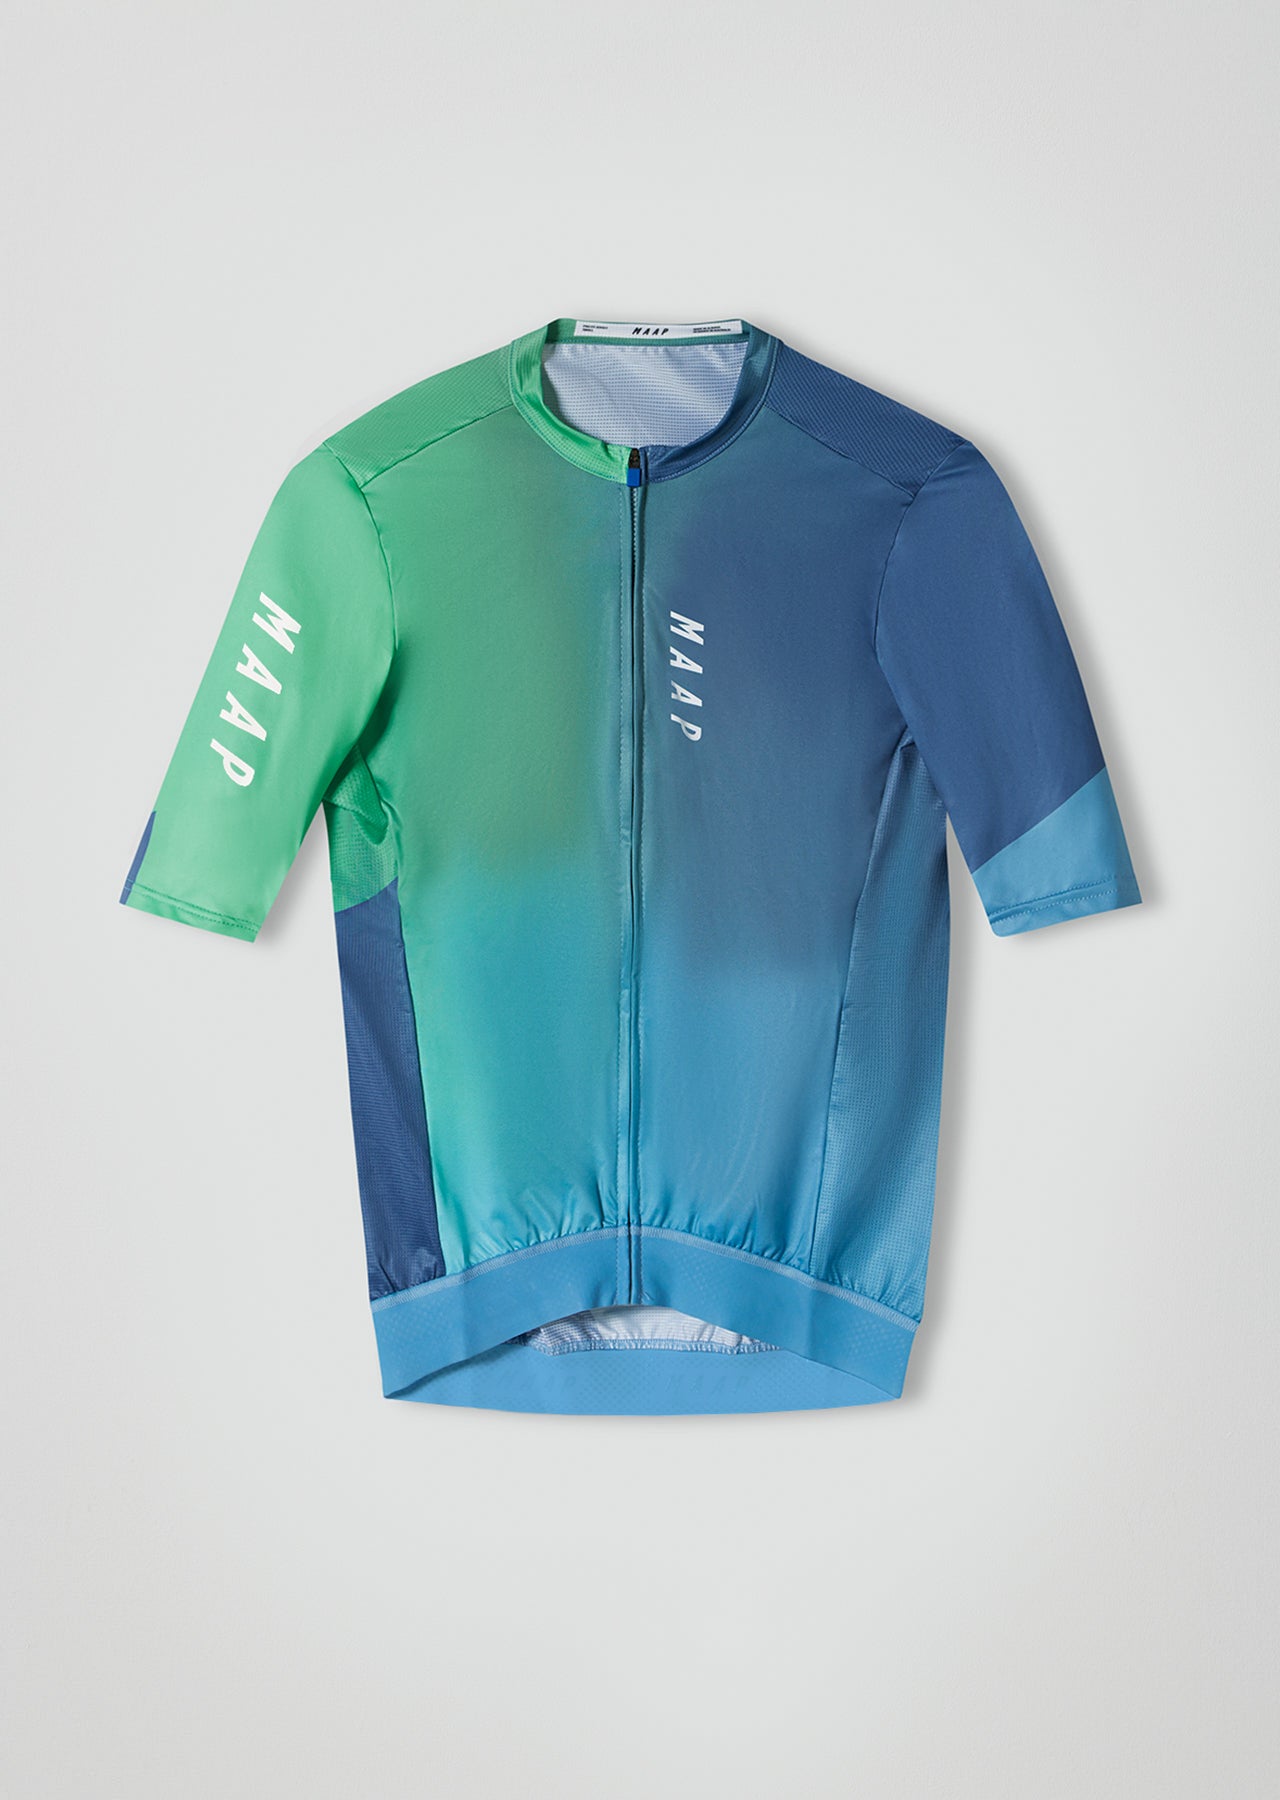 maap cycling clothes